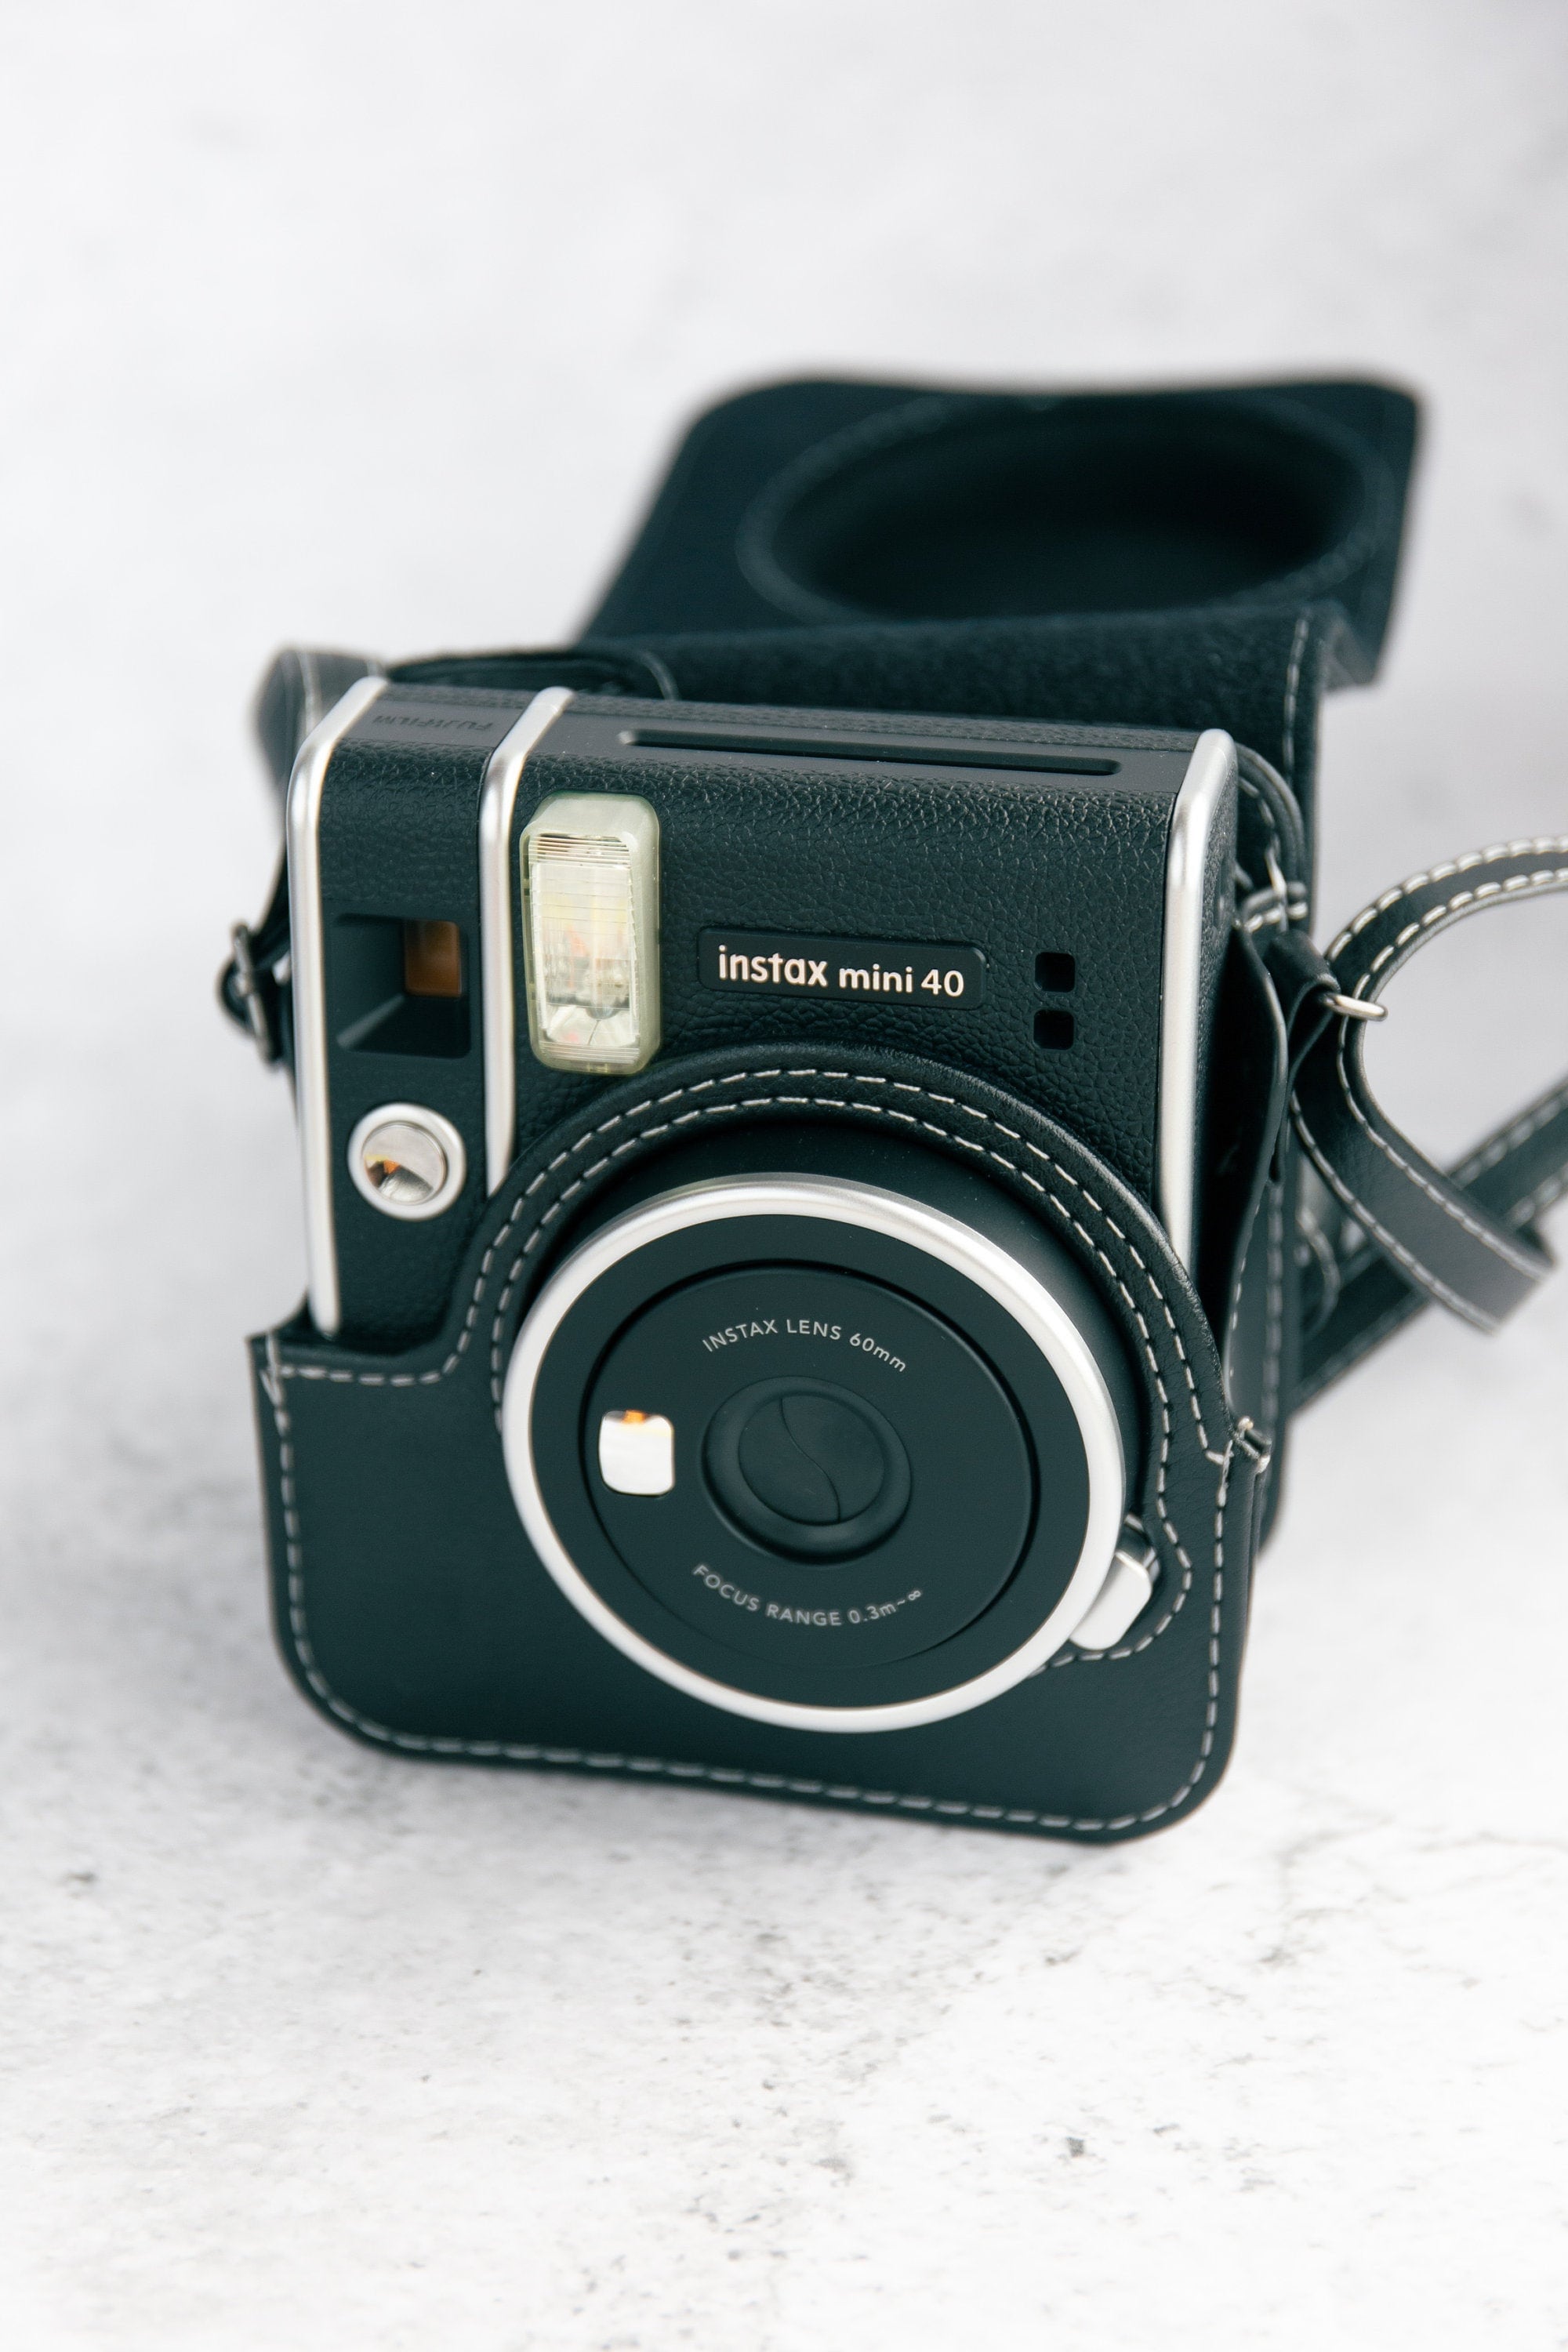 denny dean recommends How To Put Strap On Polaroid Camera